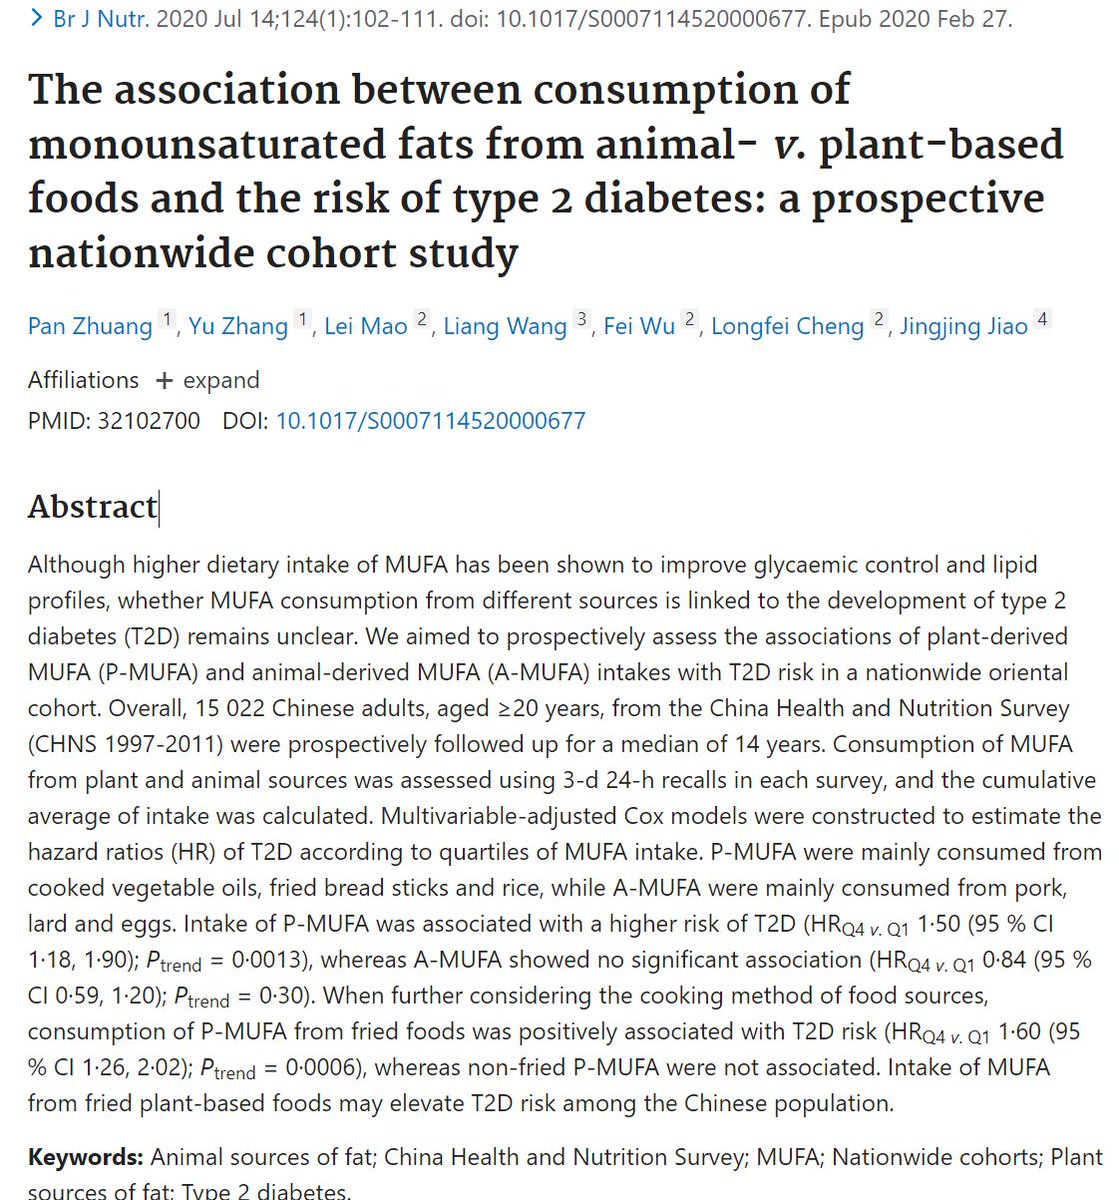 Consumption of monounsaturated fat from pork, lard and eggs was NOT associated with diabetes risk. Consumption of monounsaturated fat from plant foods (seed oils, fried bread, rice) WAS associated with increased diabetes risk. Could this be a 'causal' relationship??